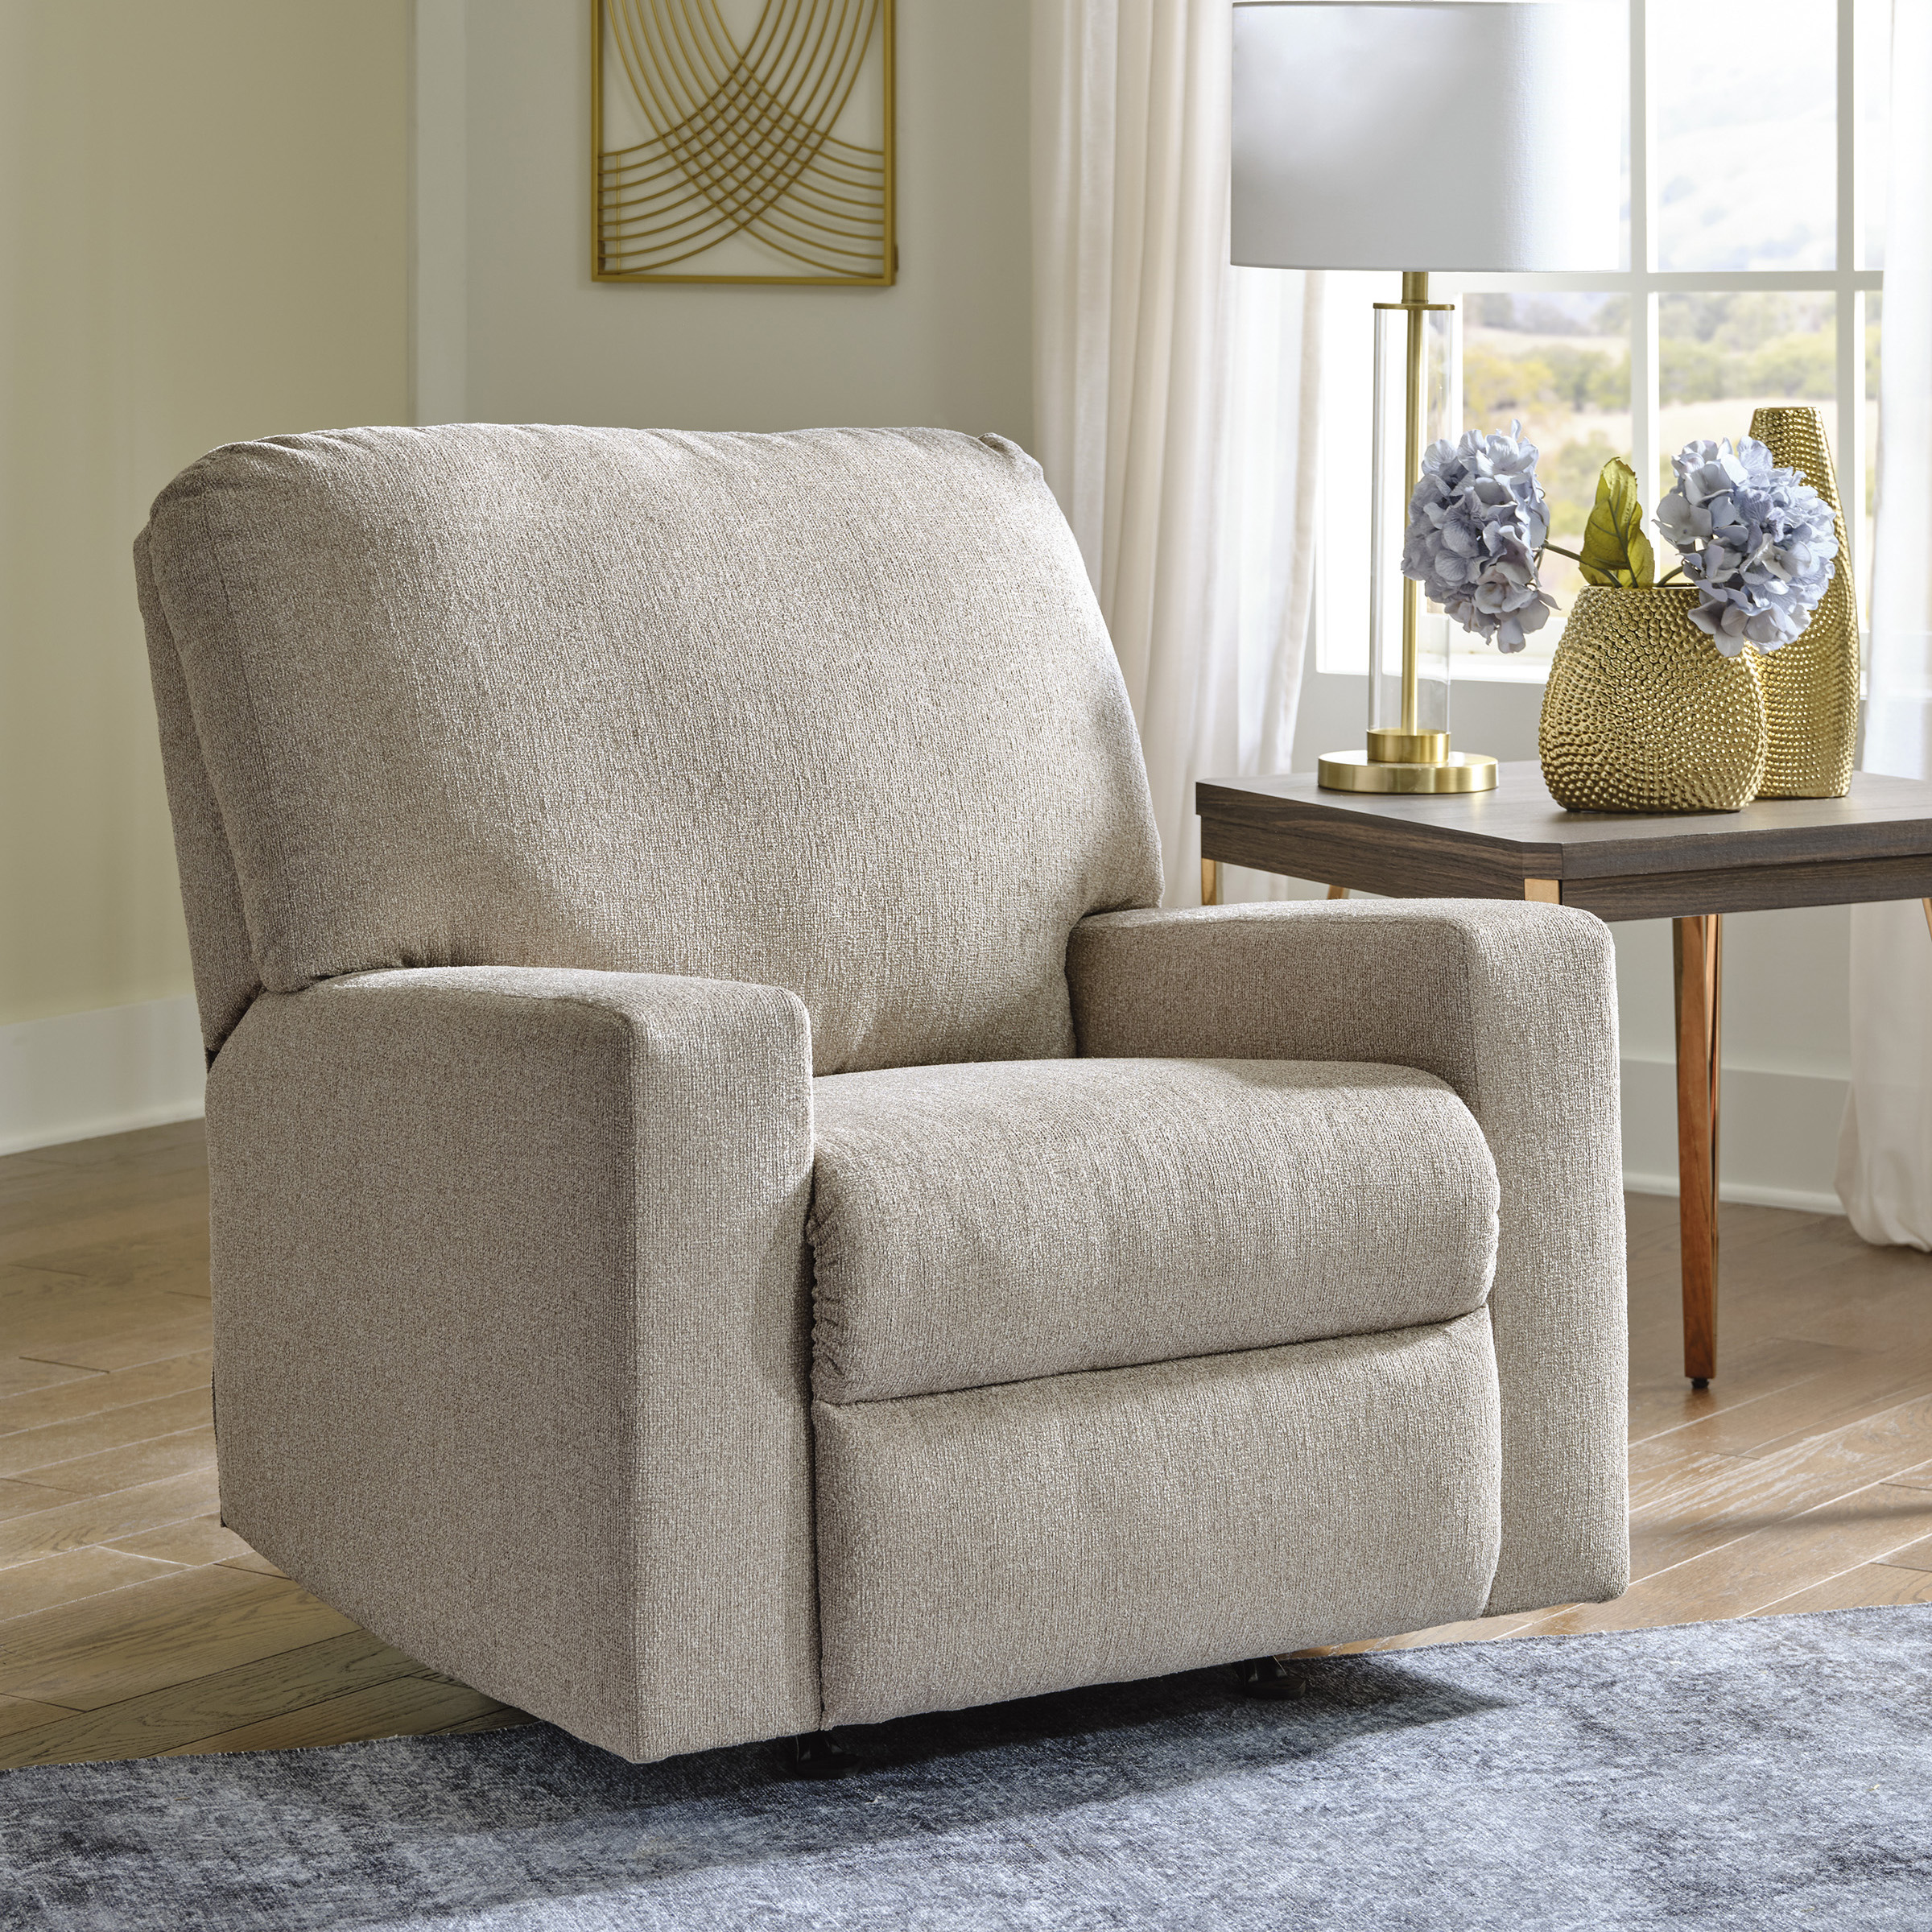 Maeve Reclining Chair (Off-White)